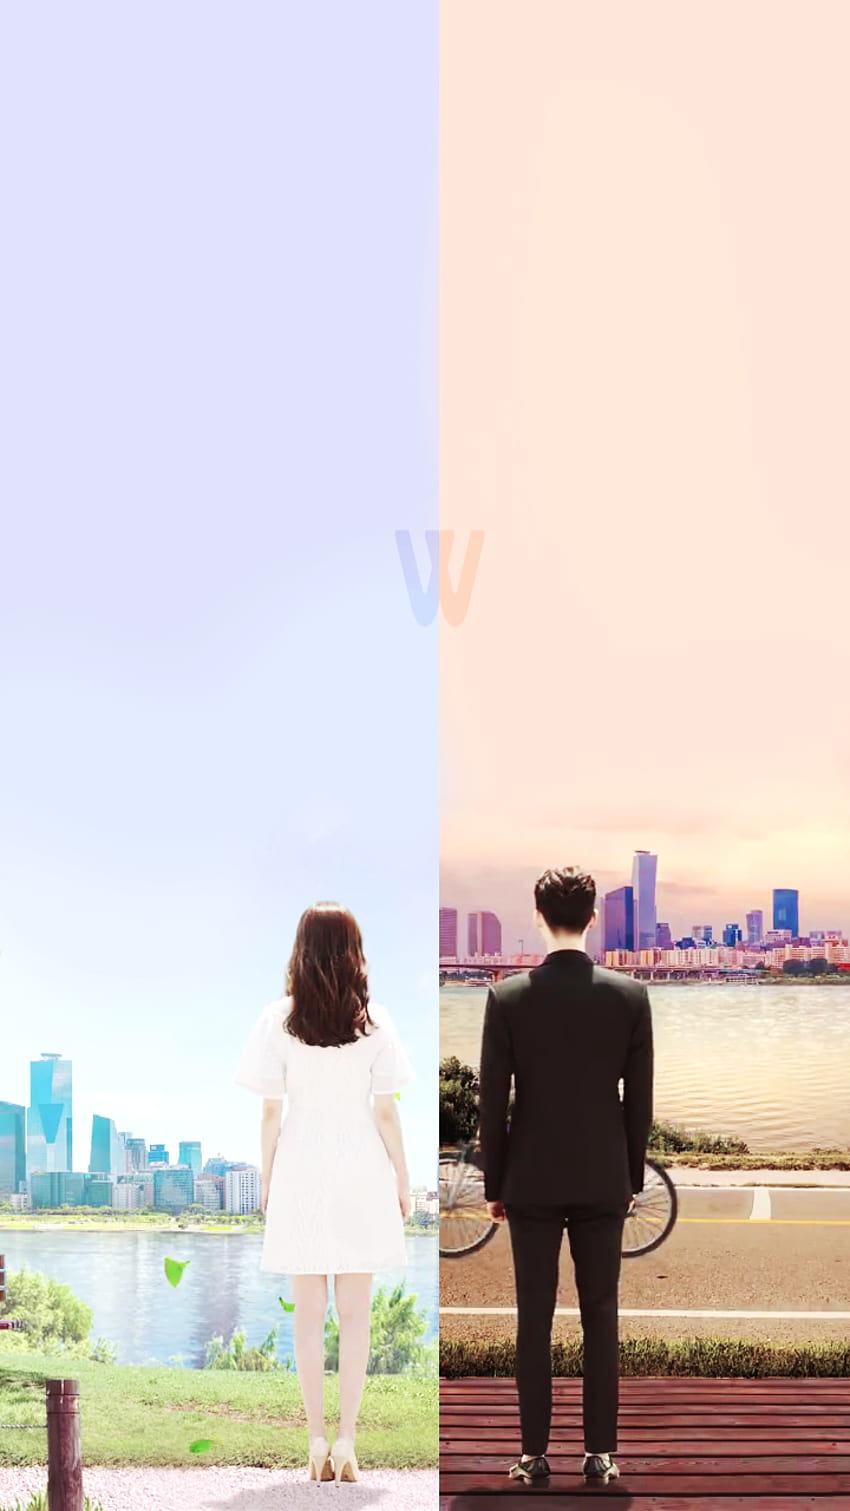 W: Two Worlds HD phone wallpaper